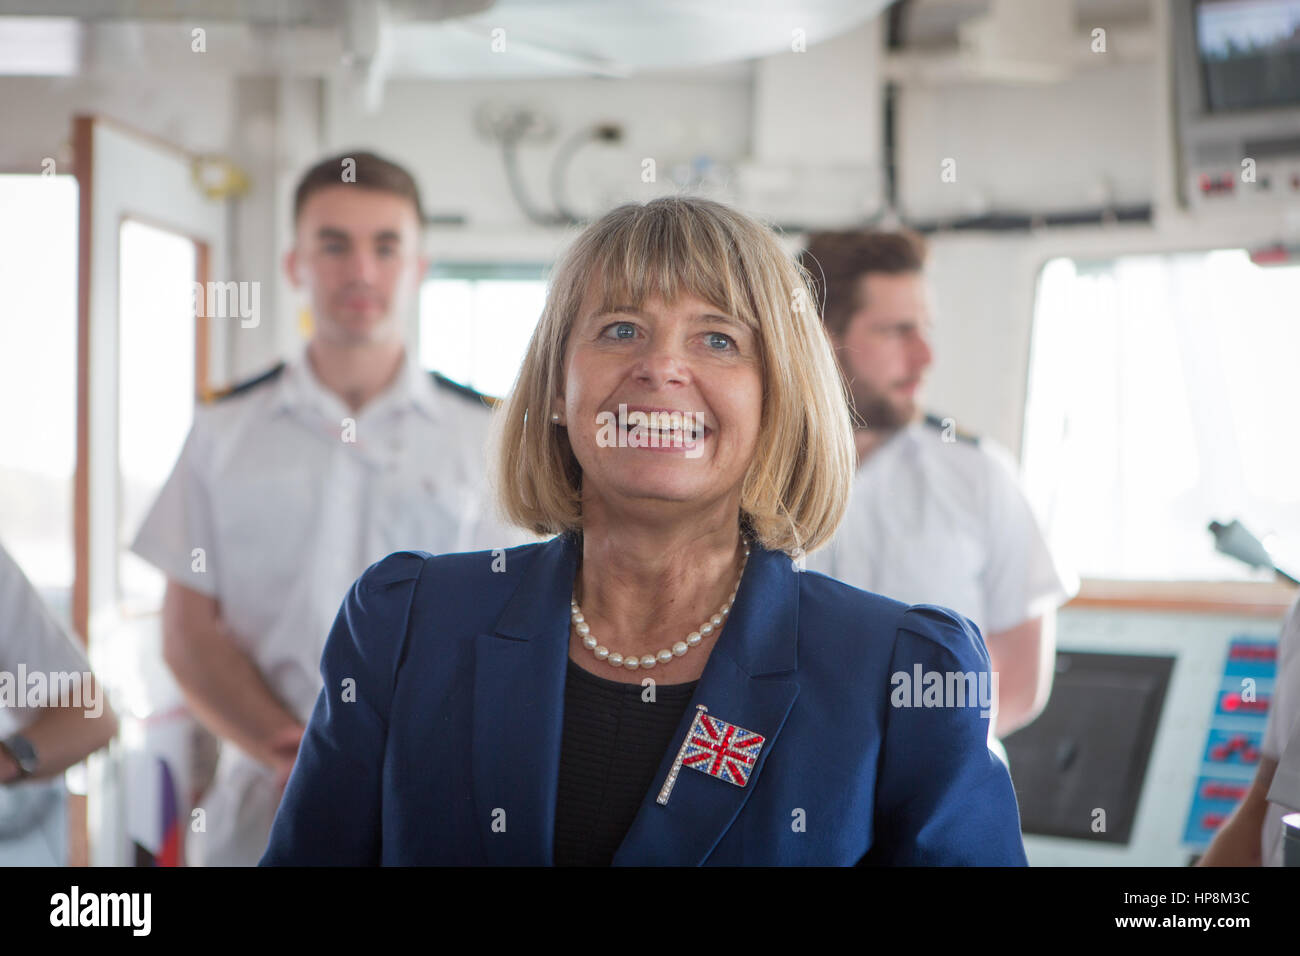 Abu Dhabi, UAE. 19th Feb, 2017. UK Defence Minister Harriett Baldwin MP visits Royal Navy ship HMS Penzance during her tour of the Defence Exhibition in Abu Dhabi. Credit: trevor sheehan/Alamy Live News Stock Photo